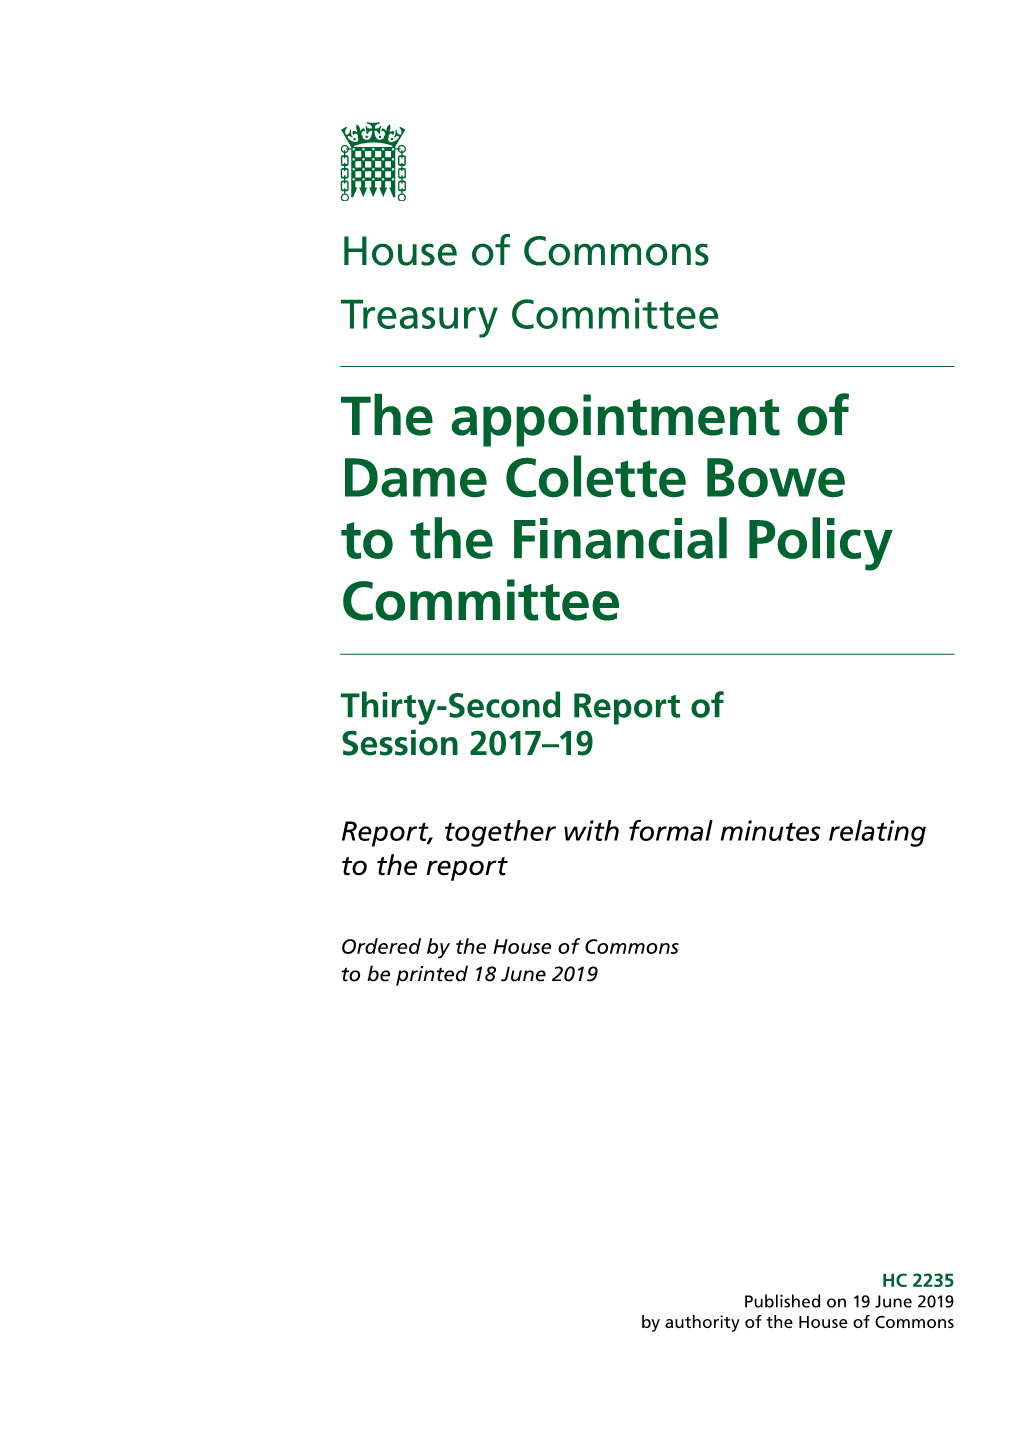 Appointment of Dame Colette Bowe to the Financial Policy Committee